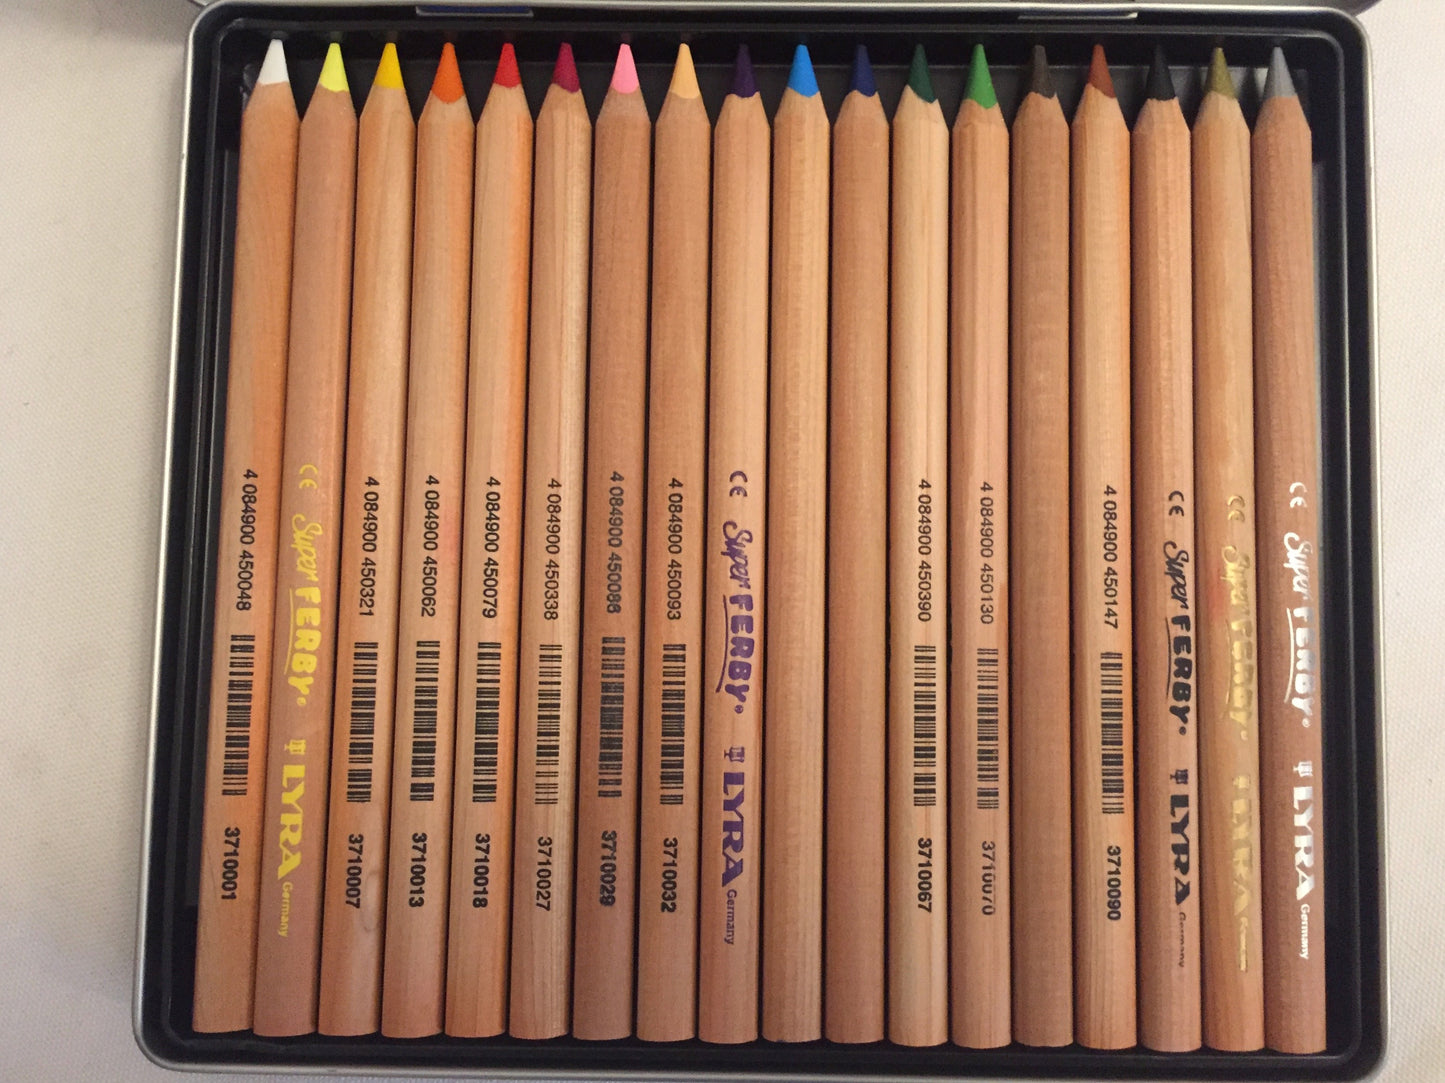 Colouring pencils, Art - 18 SUPER FERBY COLOURS, with Silver&Gold!